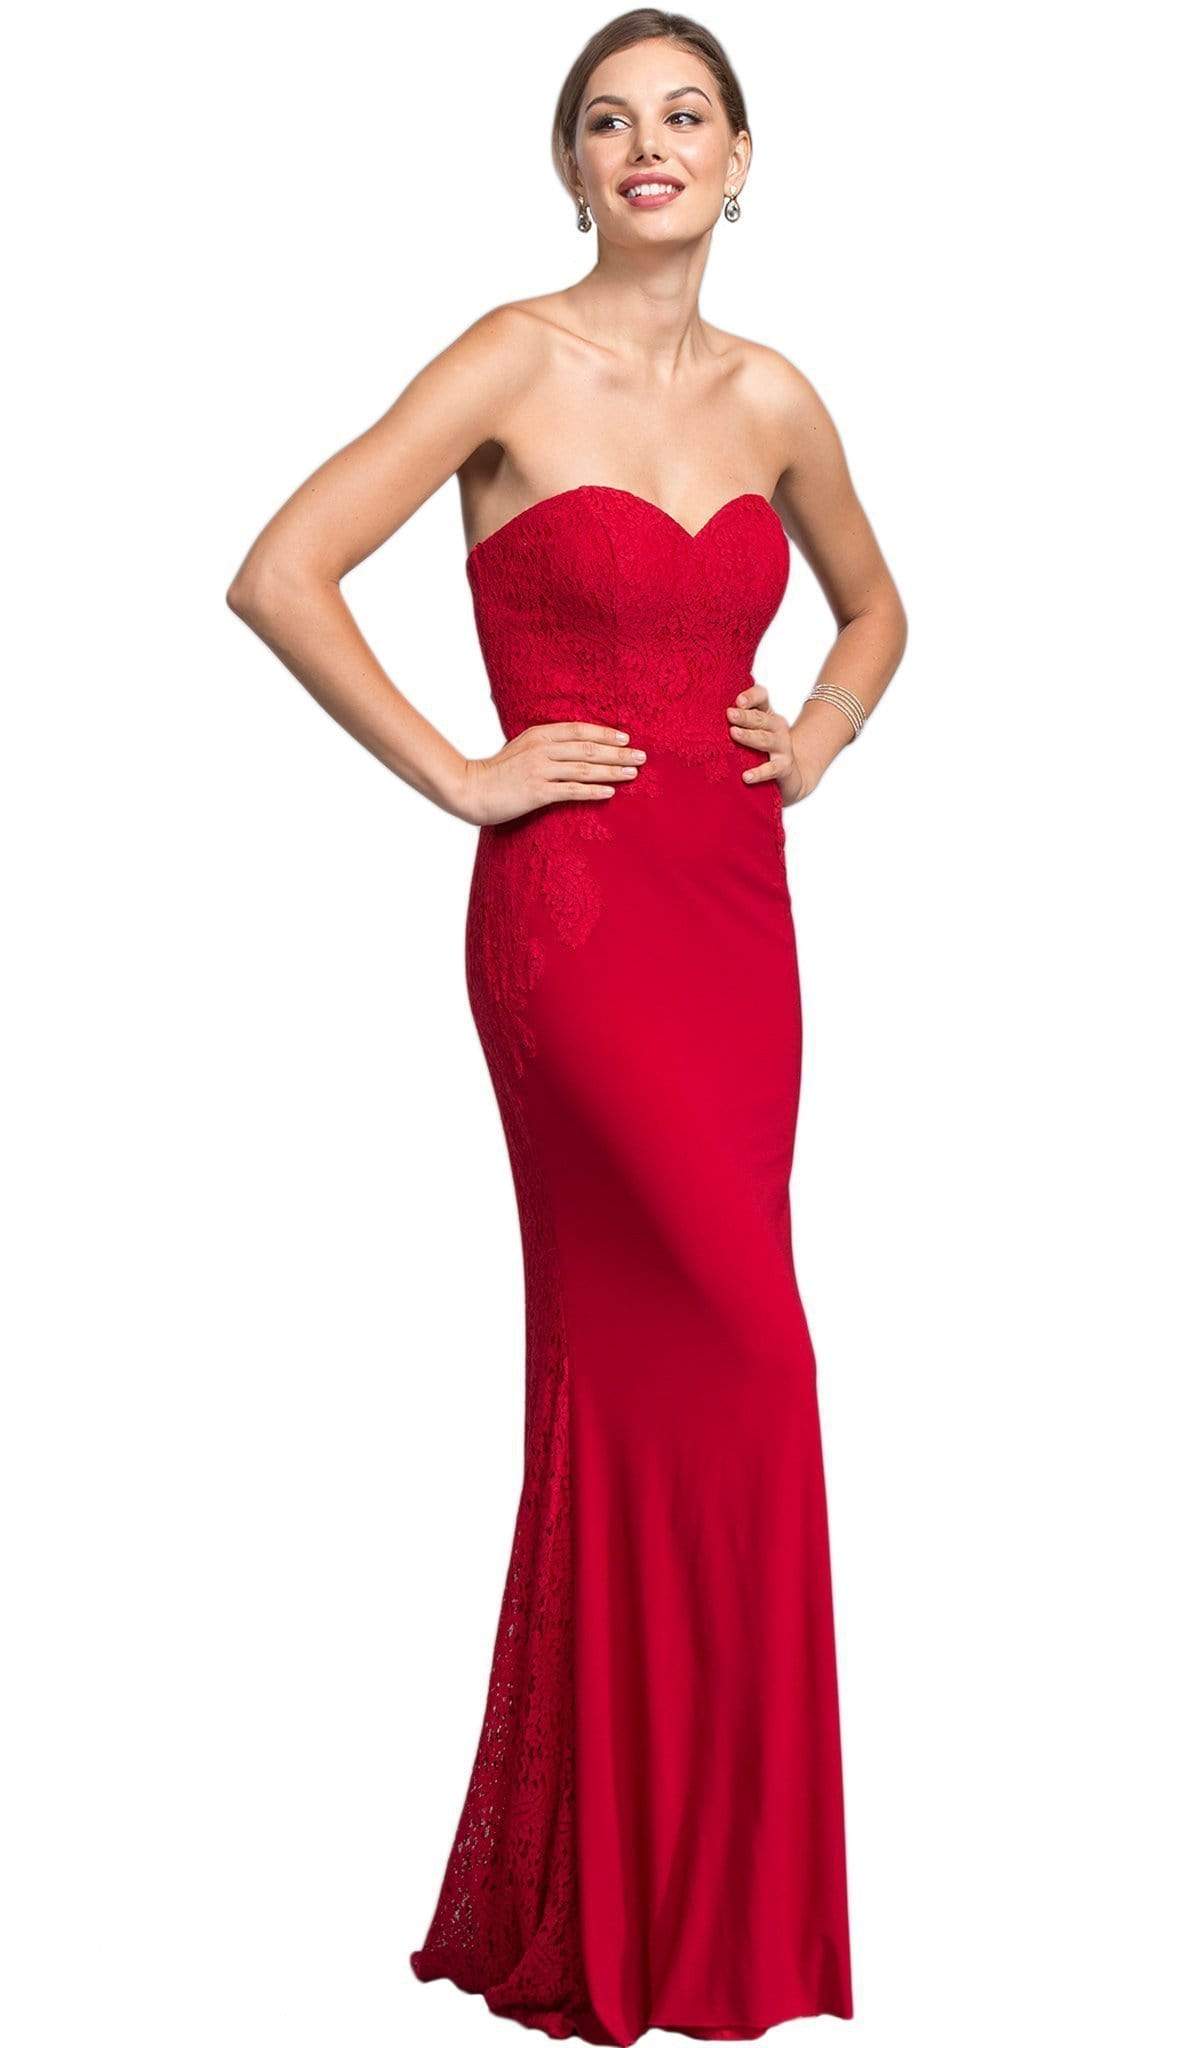 Image of Aspeed Design - Lace Strapless Sweetheart Prom Dress